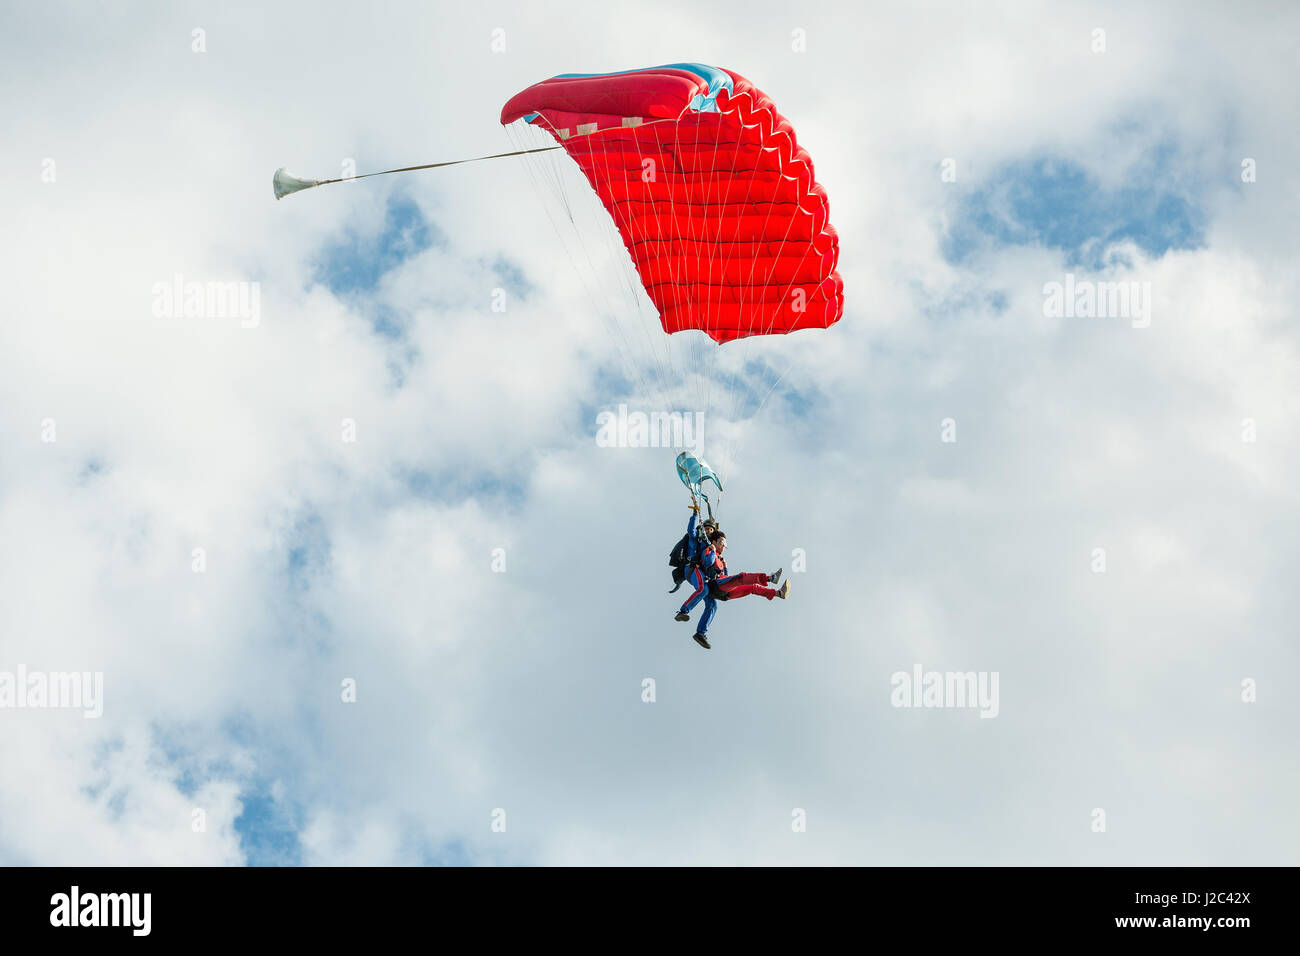 Pribram, CZE - August 19, 2016. Tandem red paraglider flying against the cloudy sky in Pribram airport, Czech Republic Stock Photo